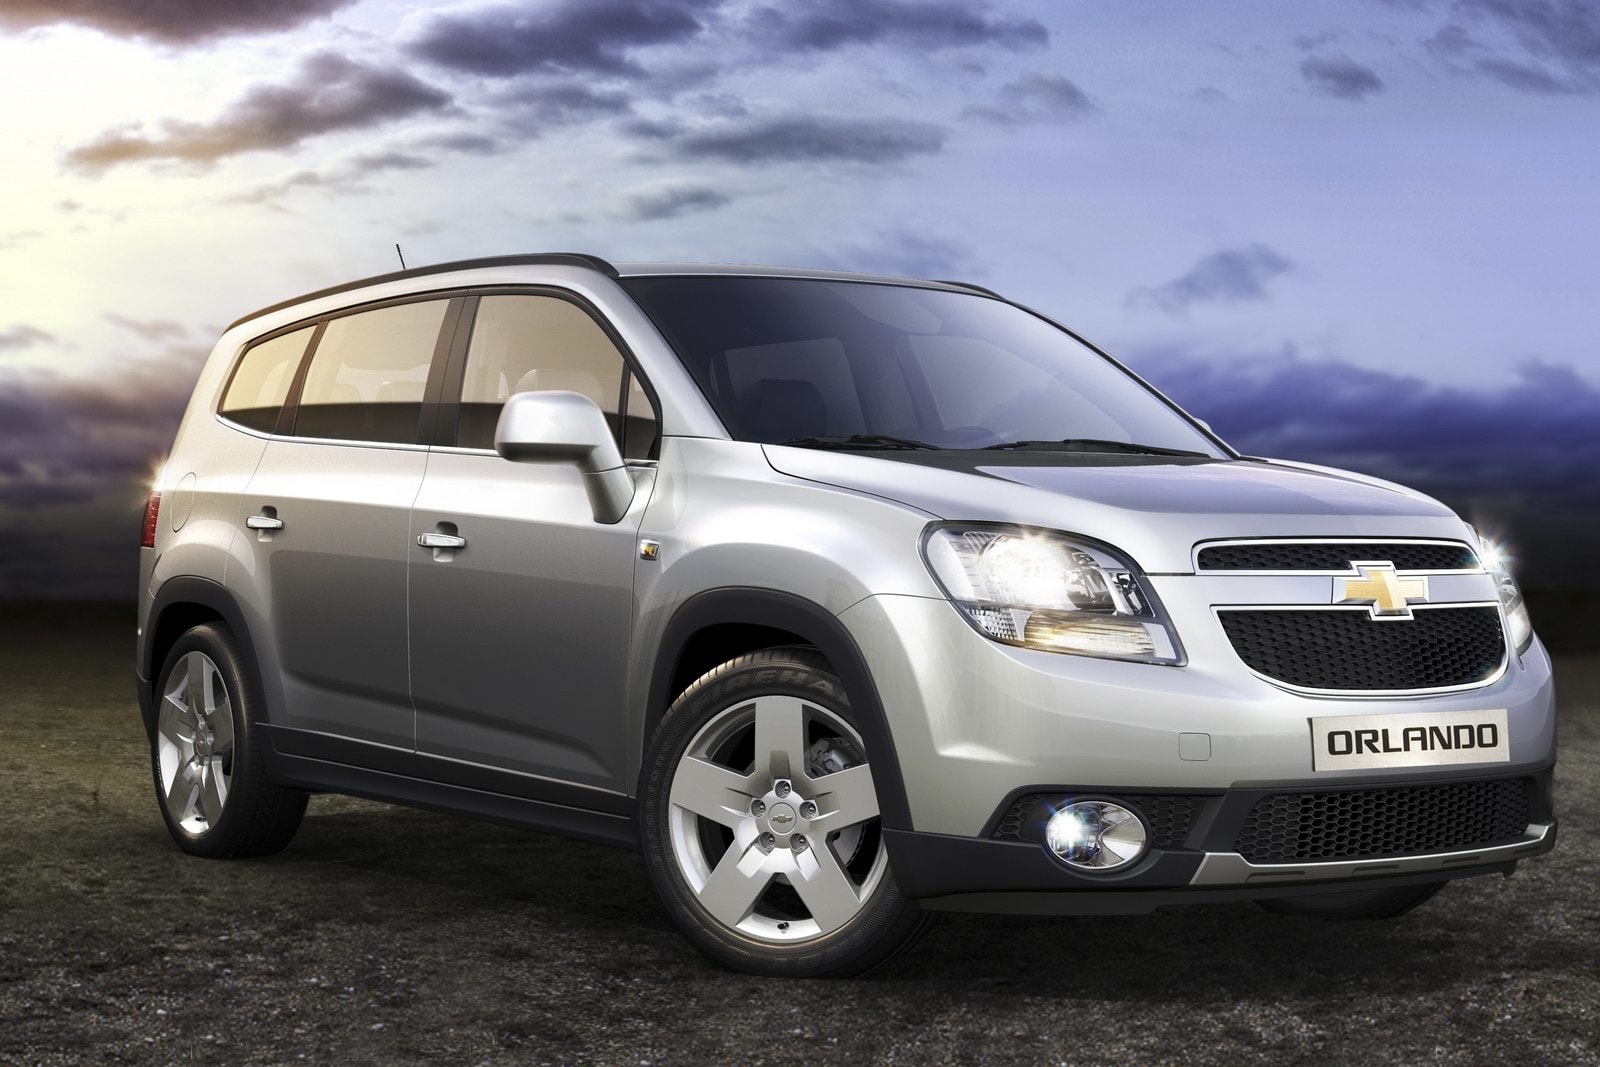 2012 Chevrolet Orlando Arrives in Canada This October for